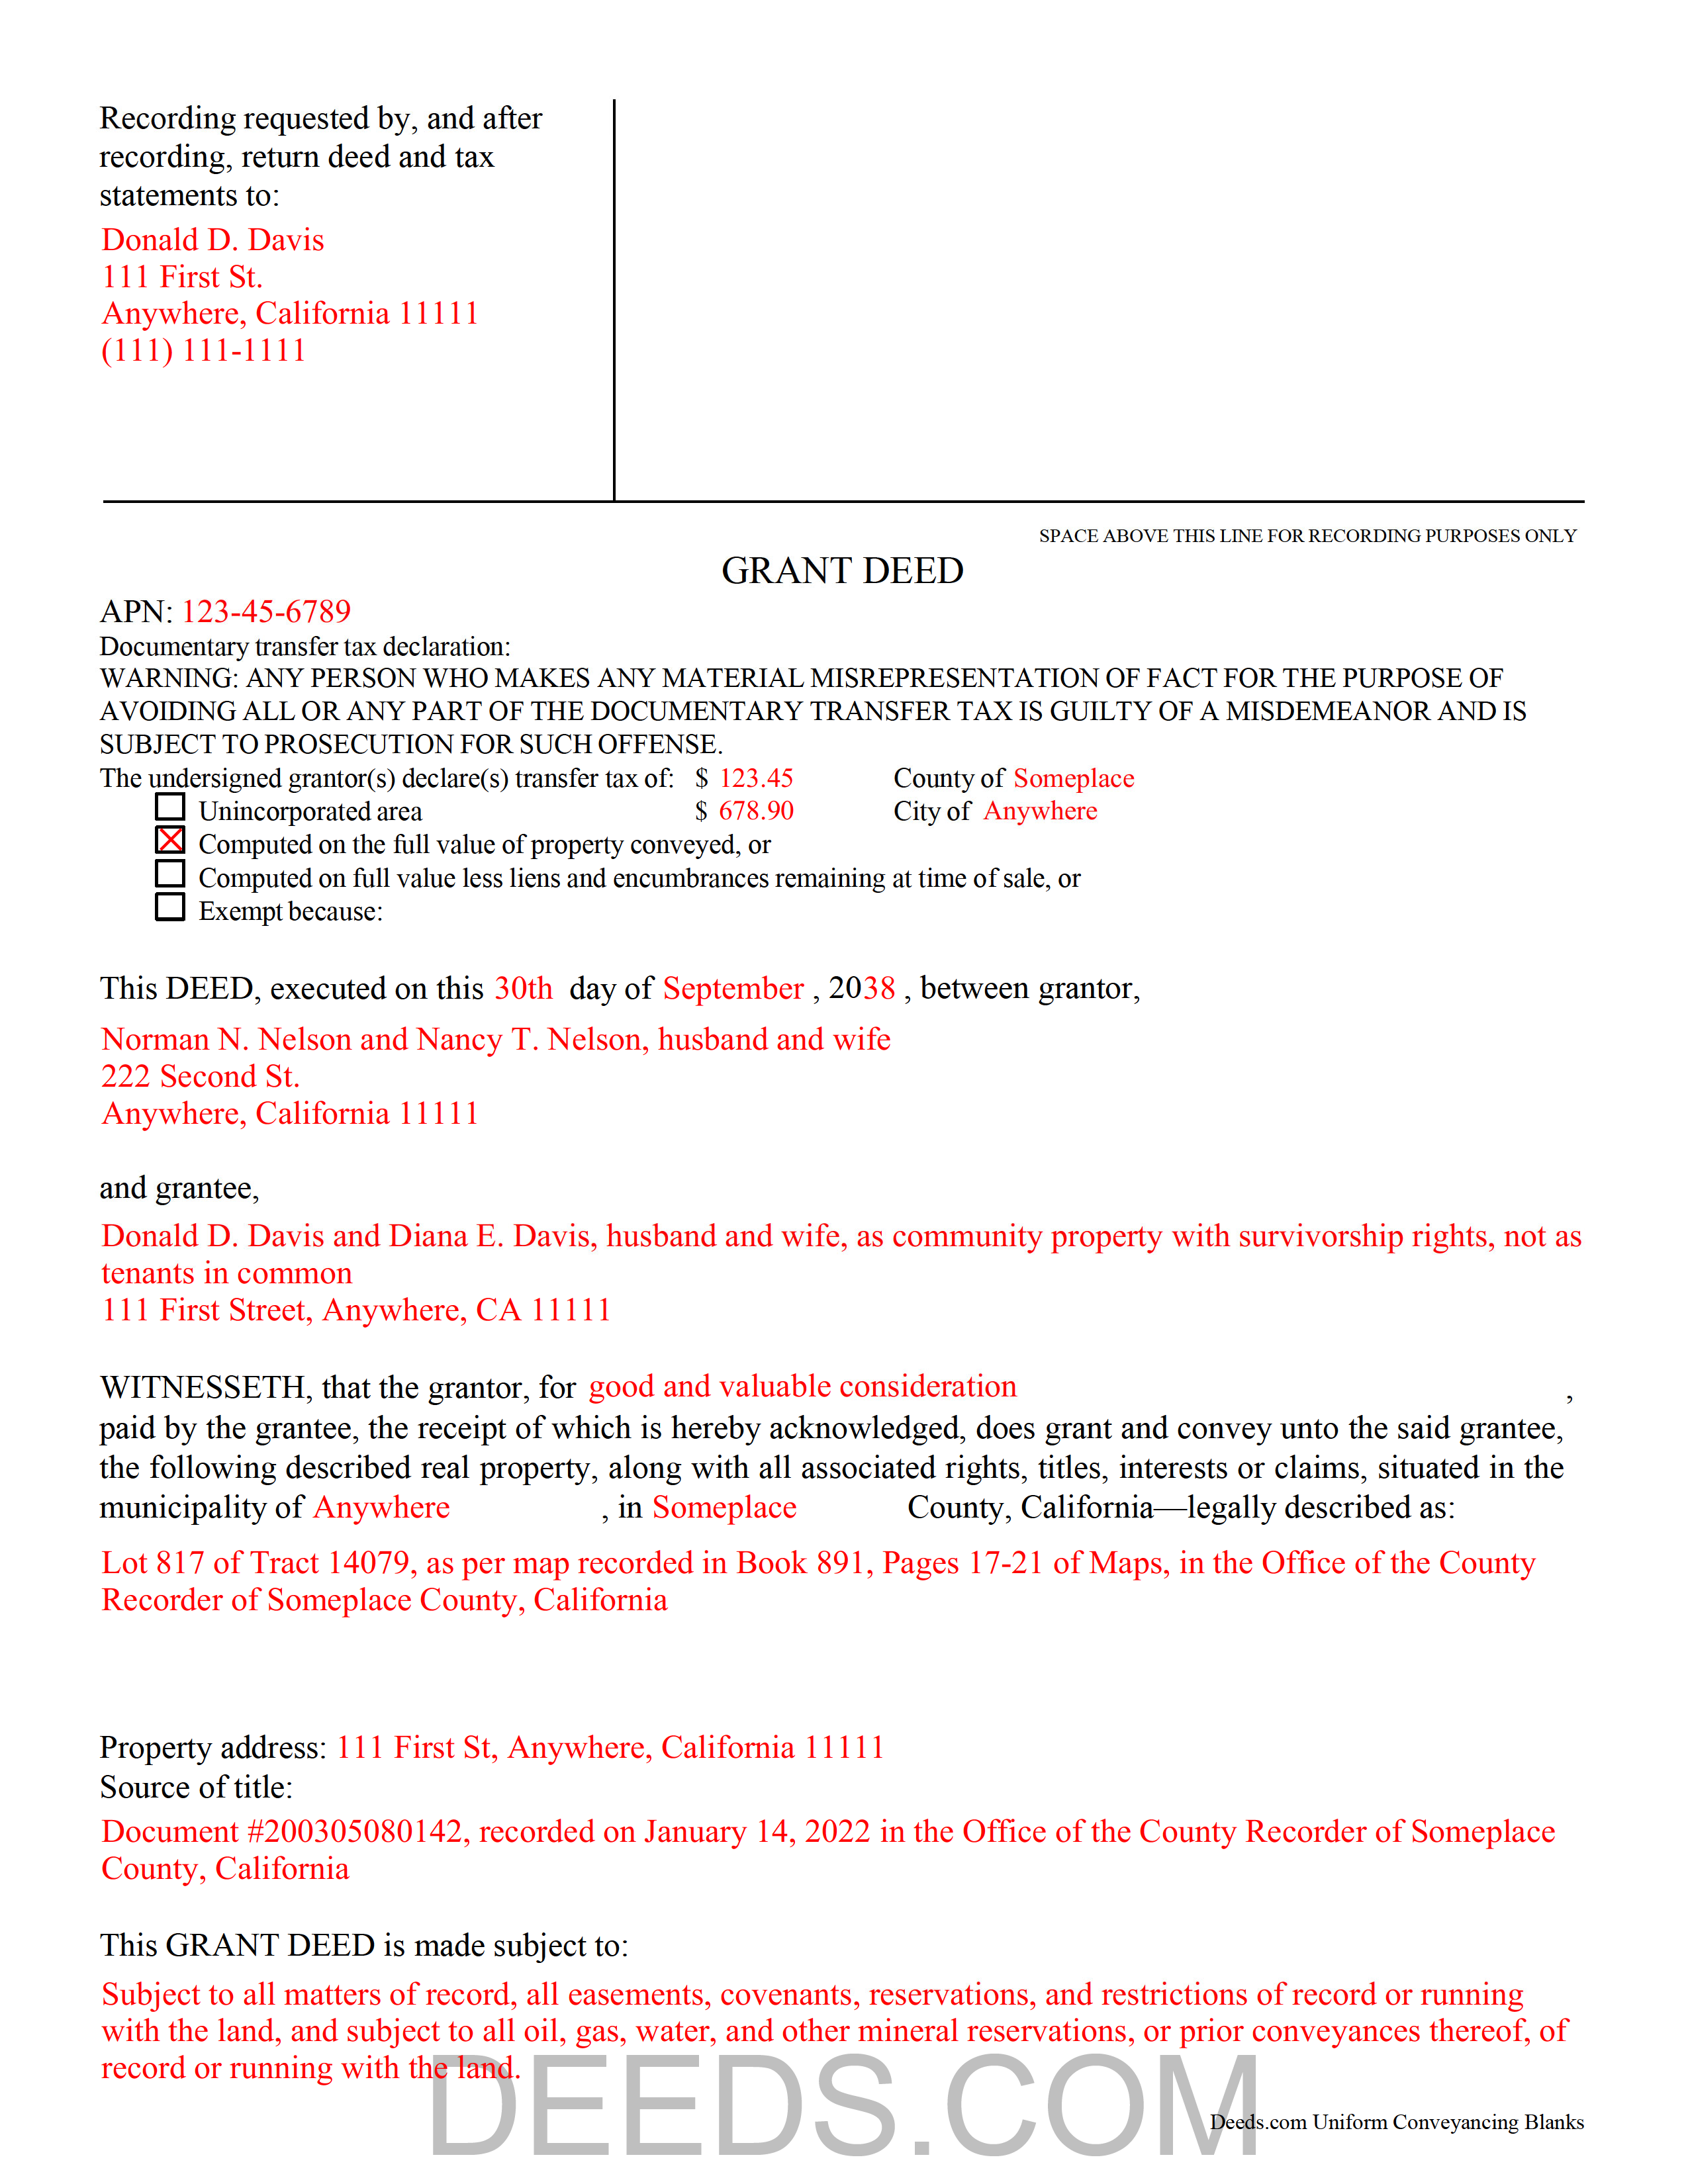 Completed Example of the Grant Deed Document